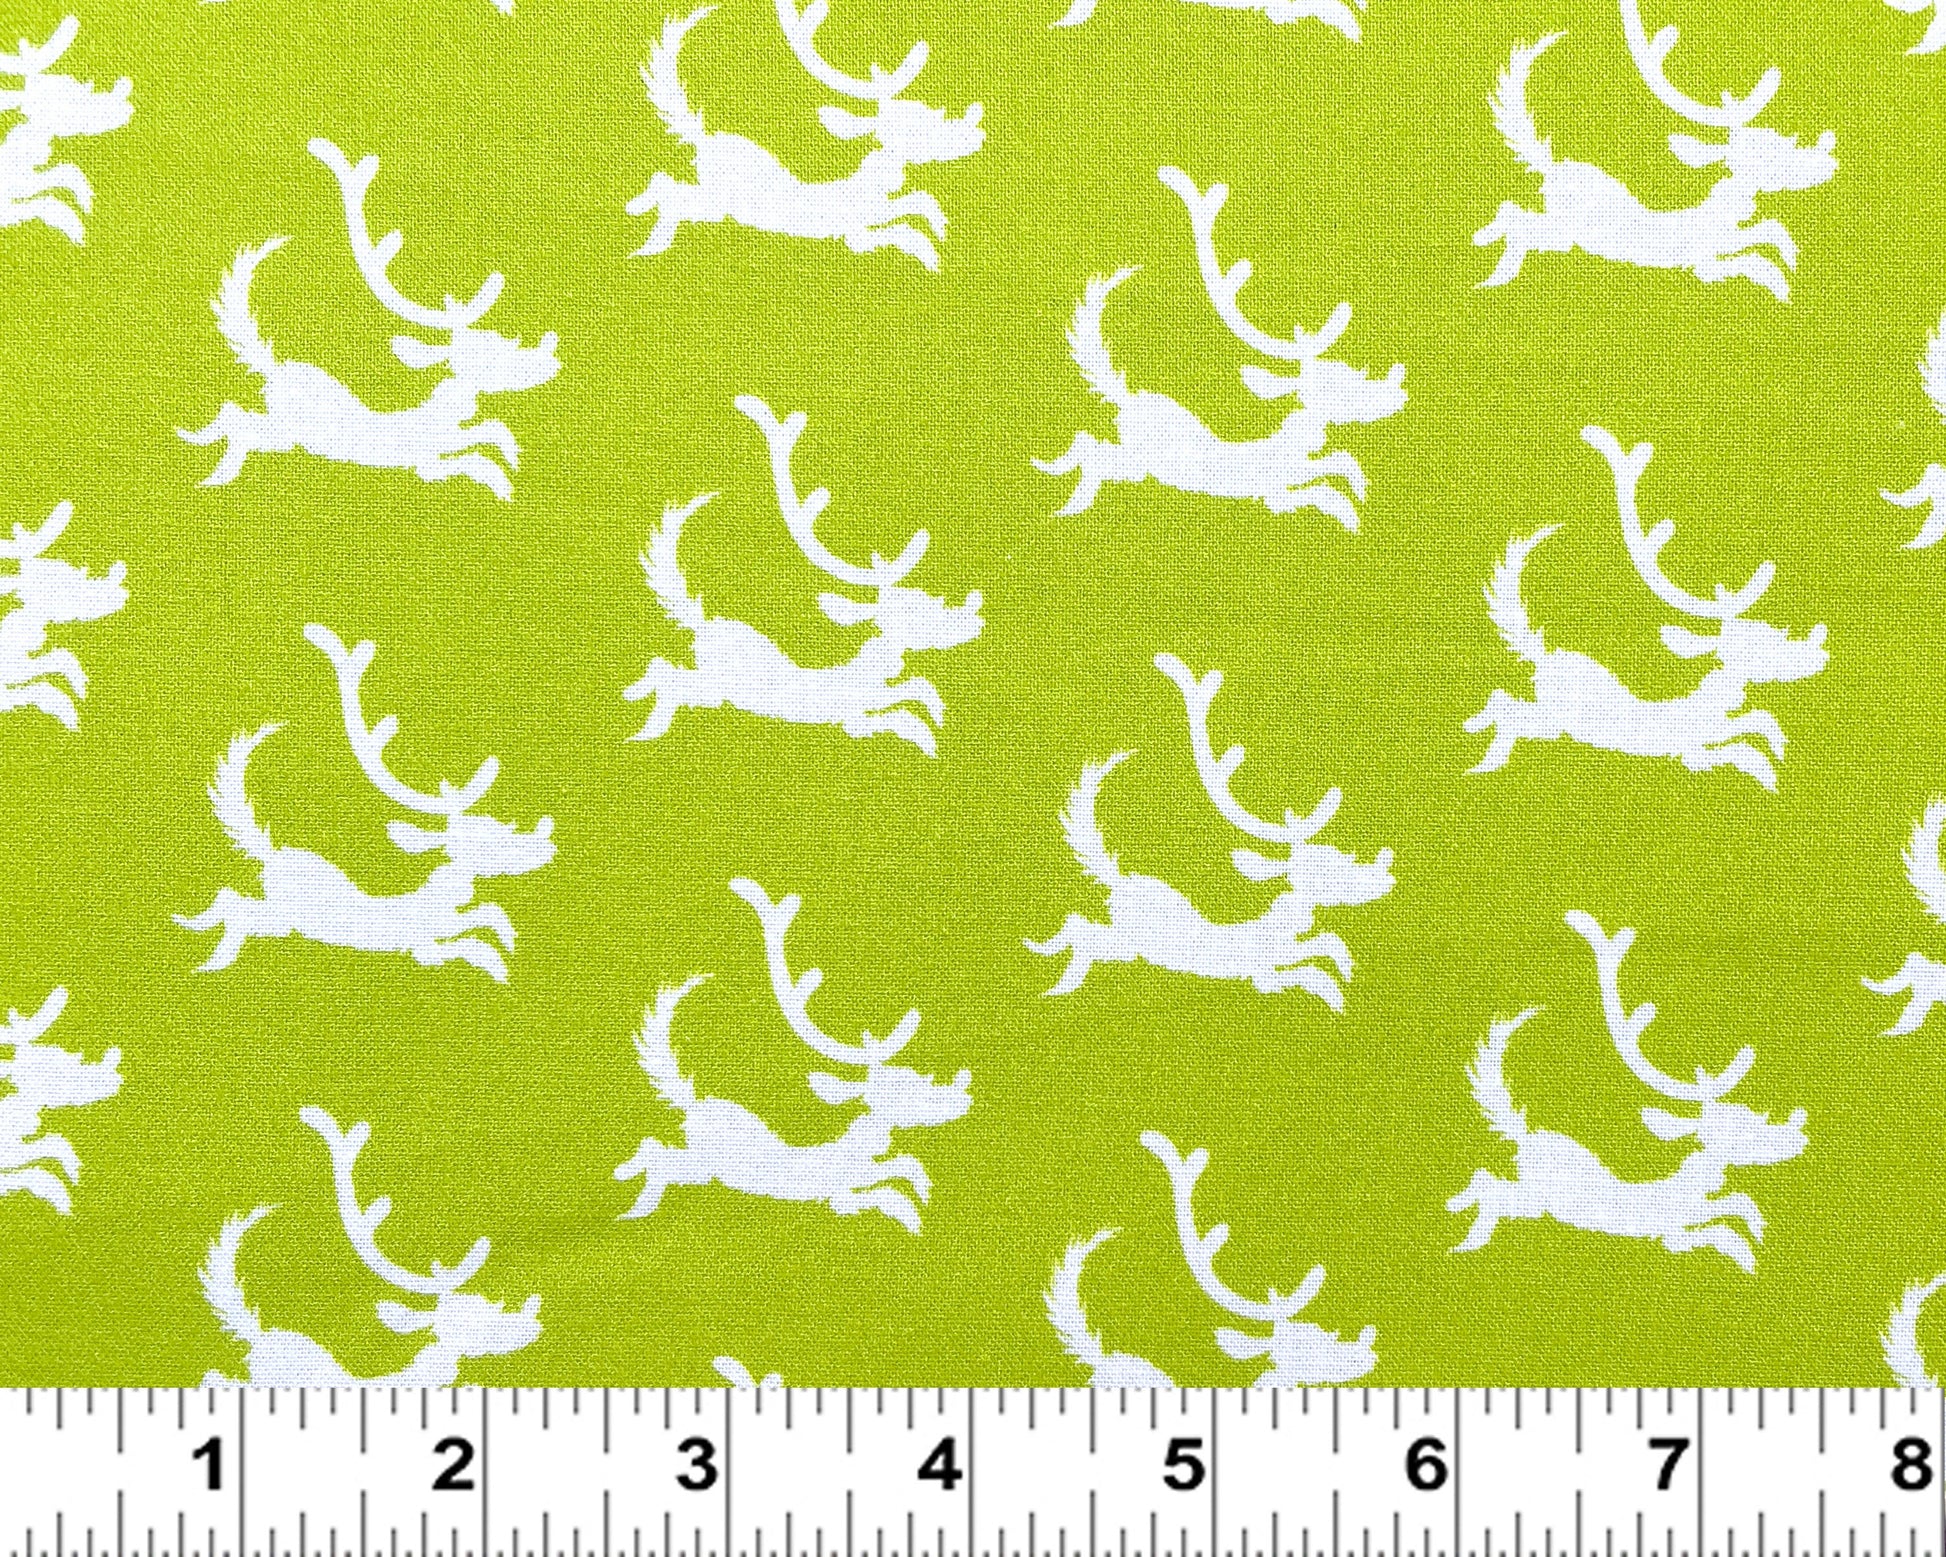 Robert Kaufman Grinch Fabric - Lime Dogs - How the Grinch Stole Christmas - 100% cotton - Reindeer fabric Max Dog Fabric - Ships NEXT DAY